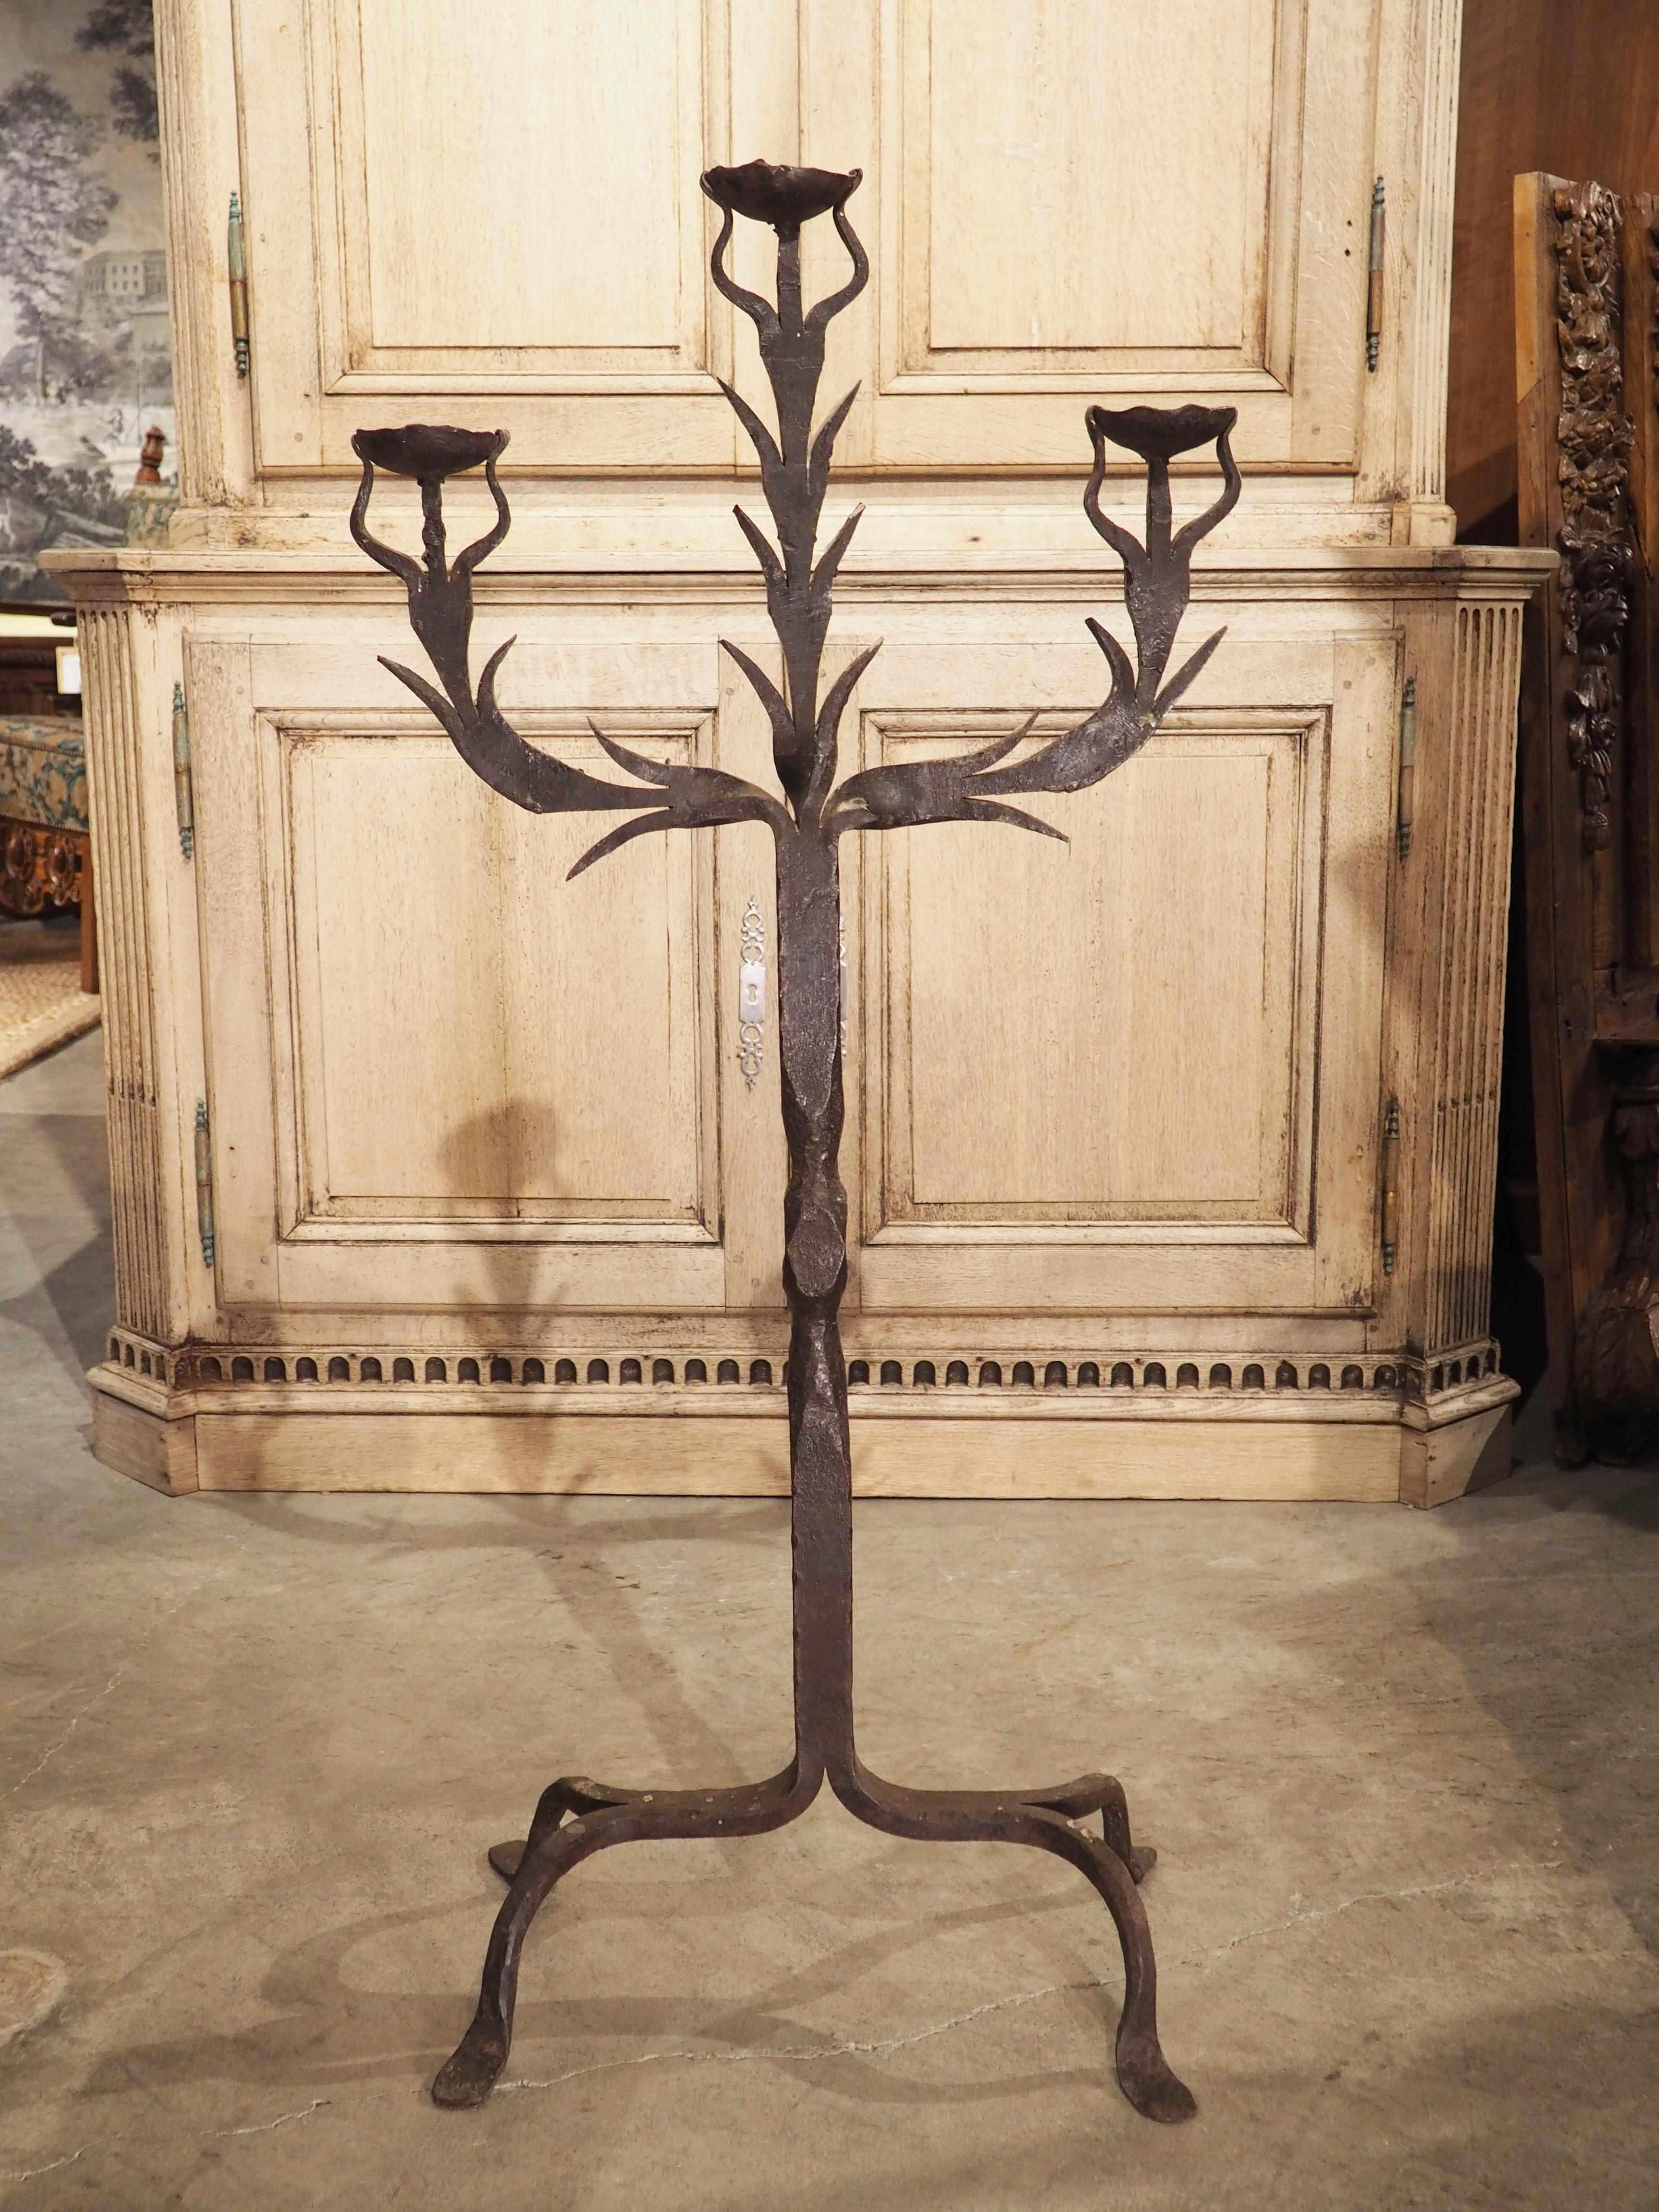 Spanish Antique Forged Iron Candelabra Torchere from Spain, Circa 1900 For Sale